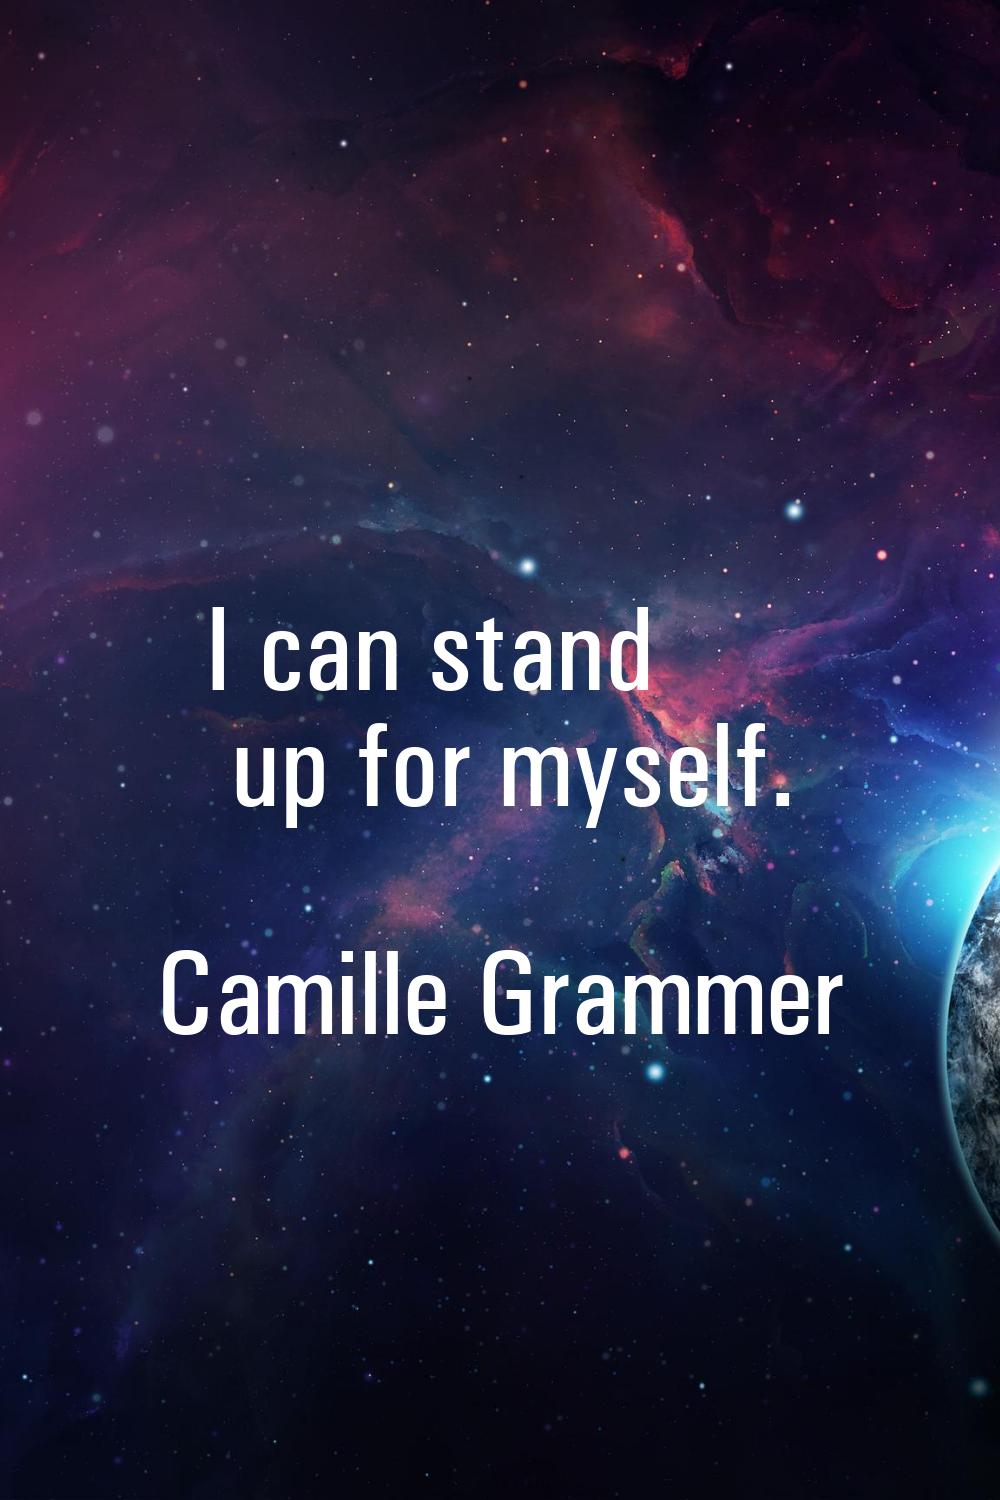 I can stand up for myself.